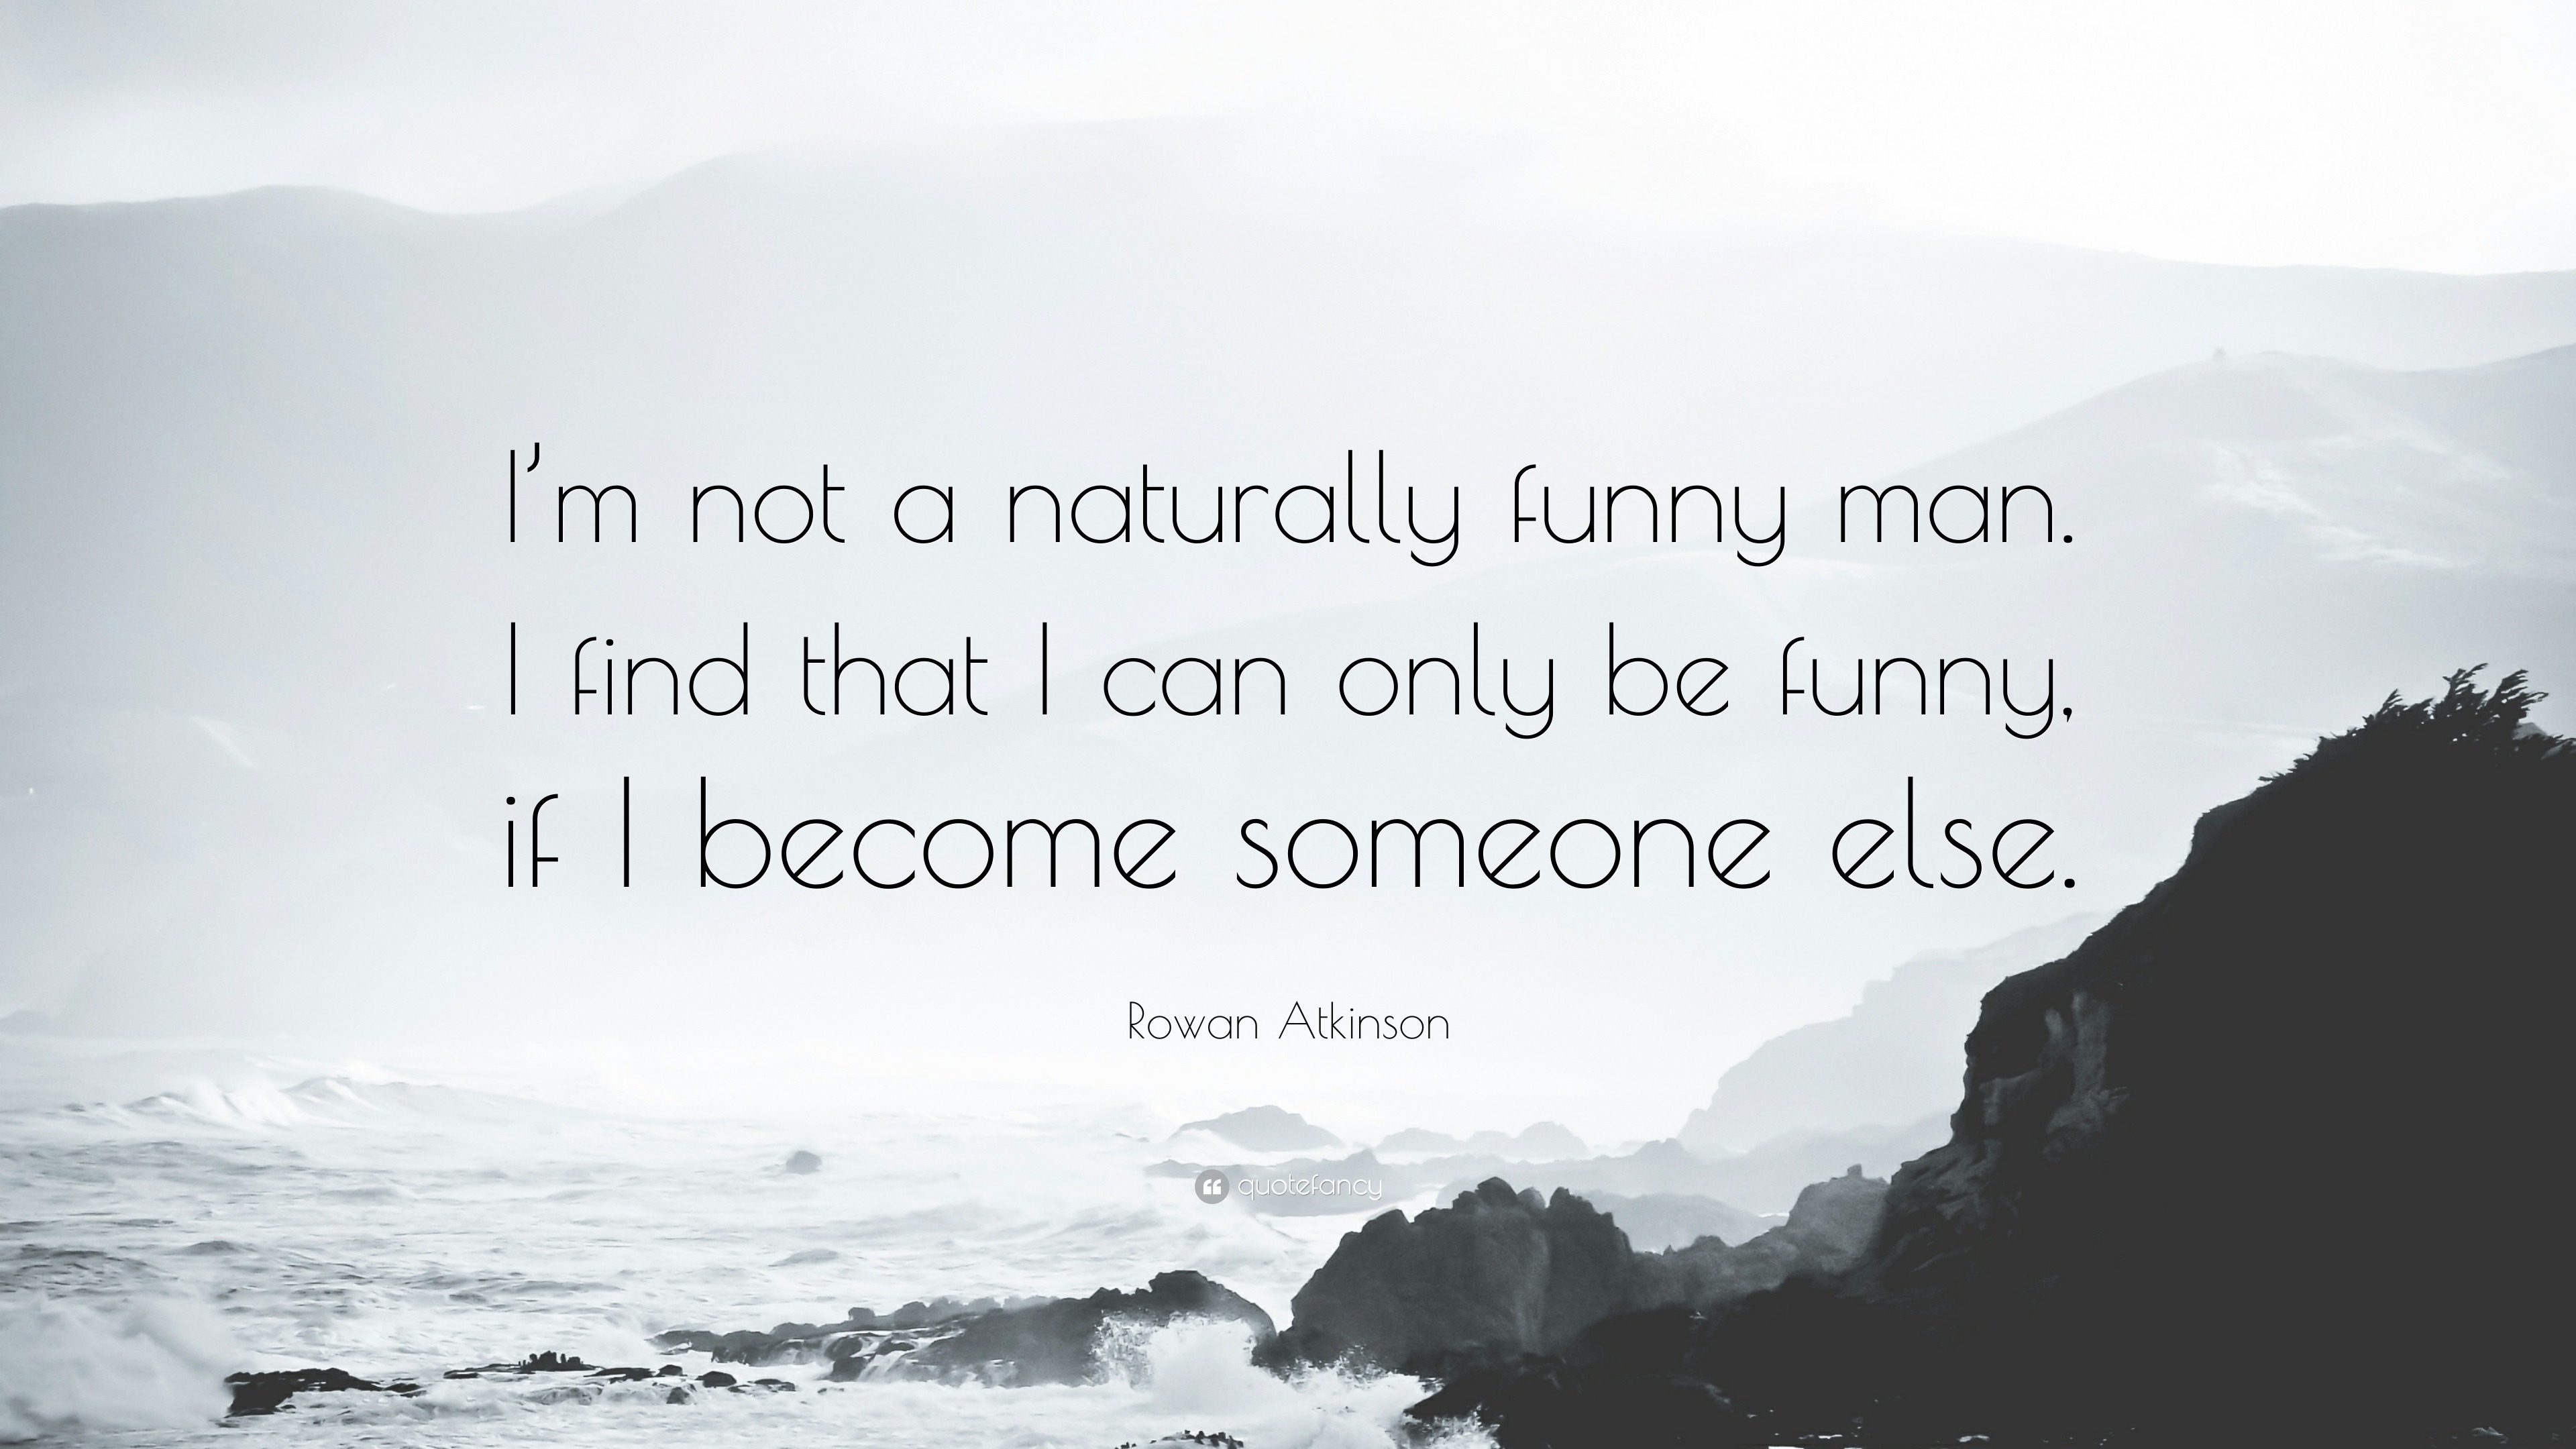 Rowan Atkinson Quote: “I'm not a naturally funny man. I find that I can only